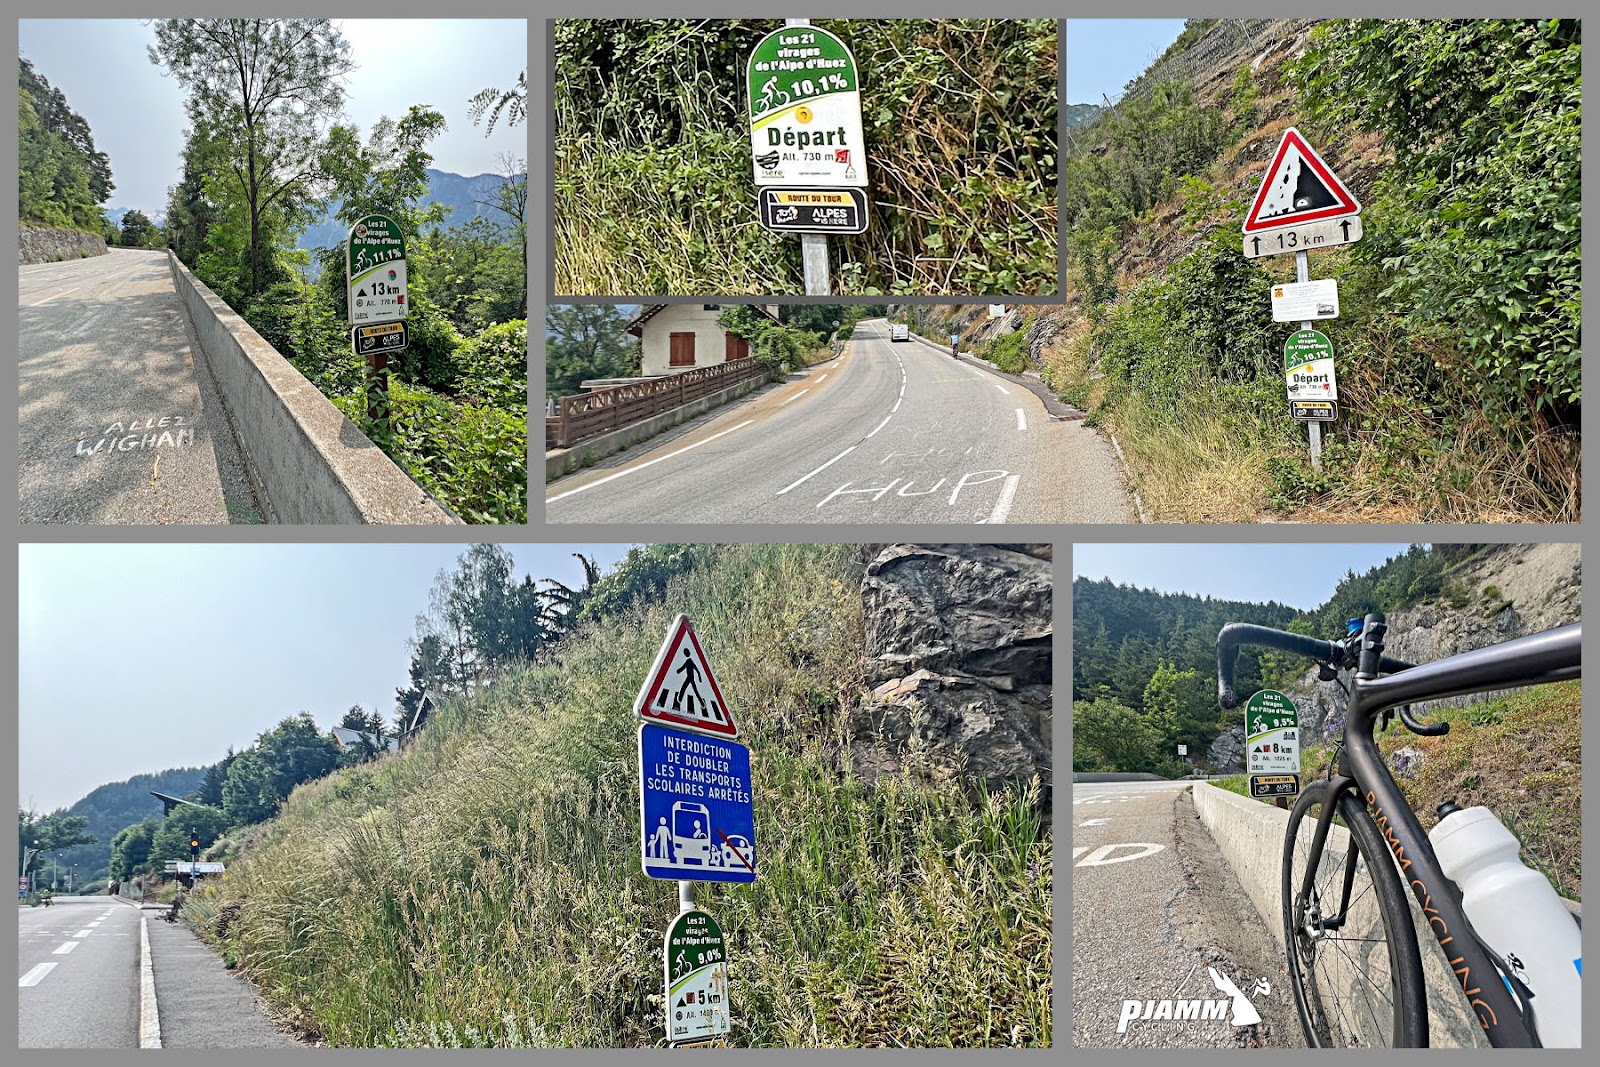 photo collage shows kilometer signs, along with other roadsigns, along the Alpe d'Huez climb